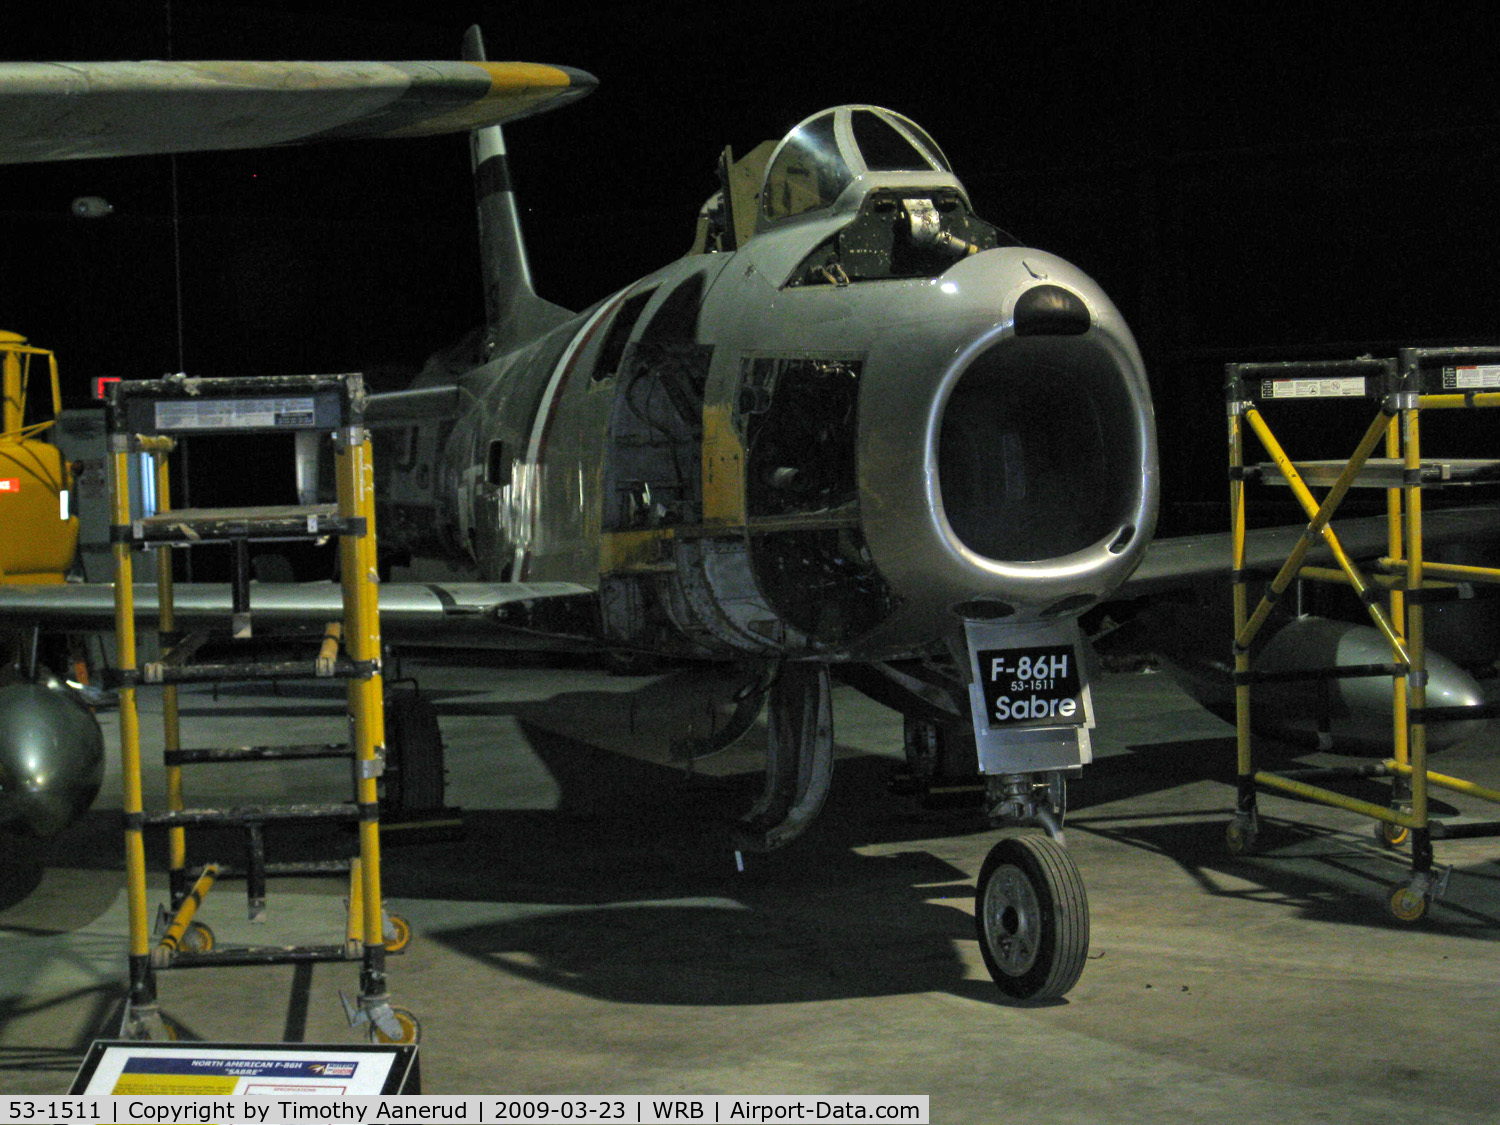 53-1511, 1953 North American F-86H Sabre C/N 203-283, Museum of Aviation, Robins AFB